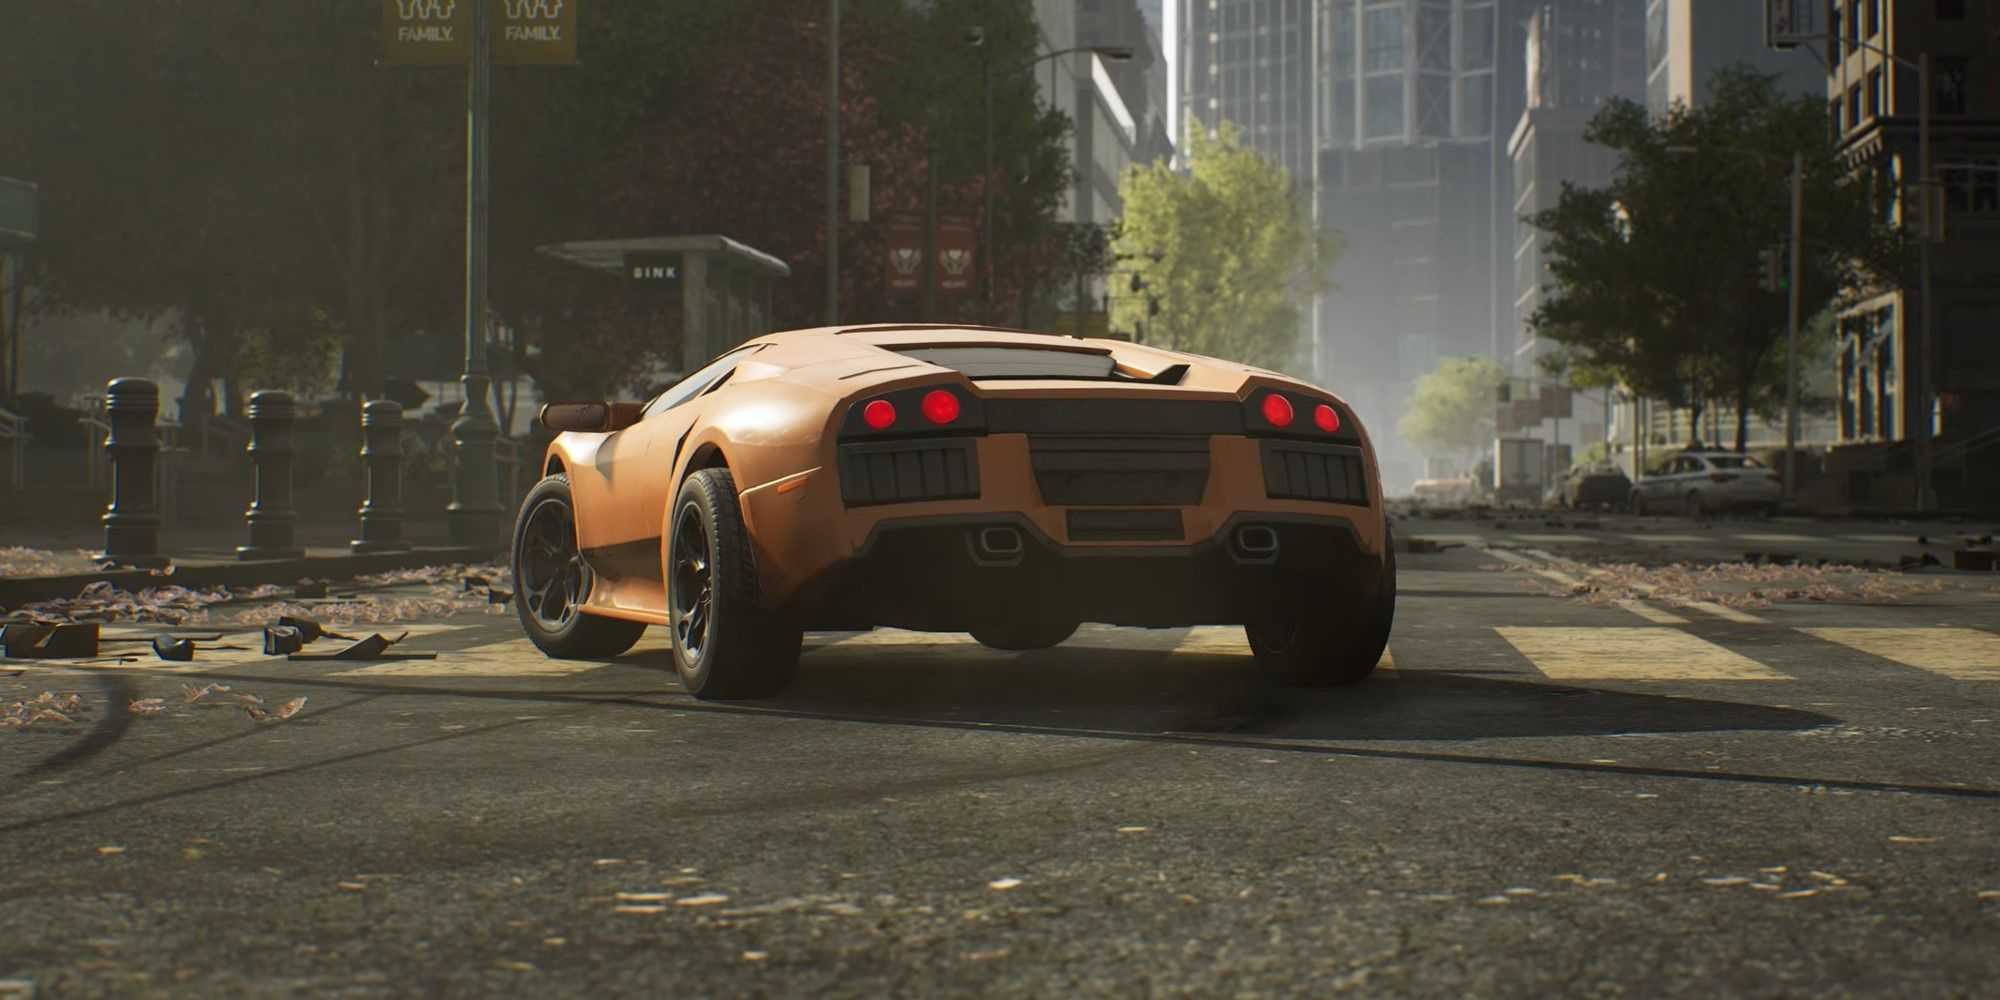 The Day Before Has a Release Date and a Lamborghini-Themed Trailer